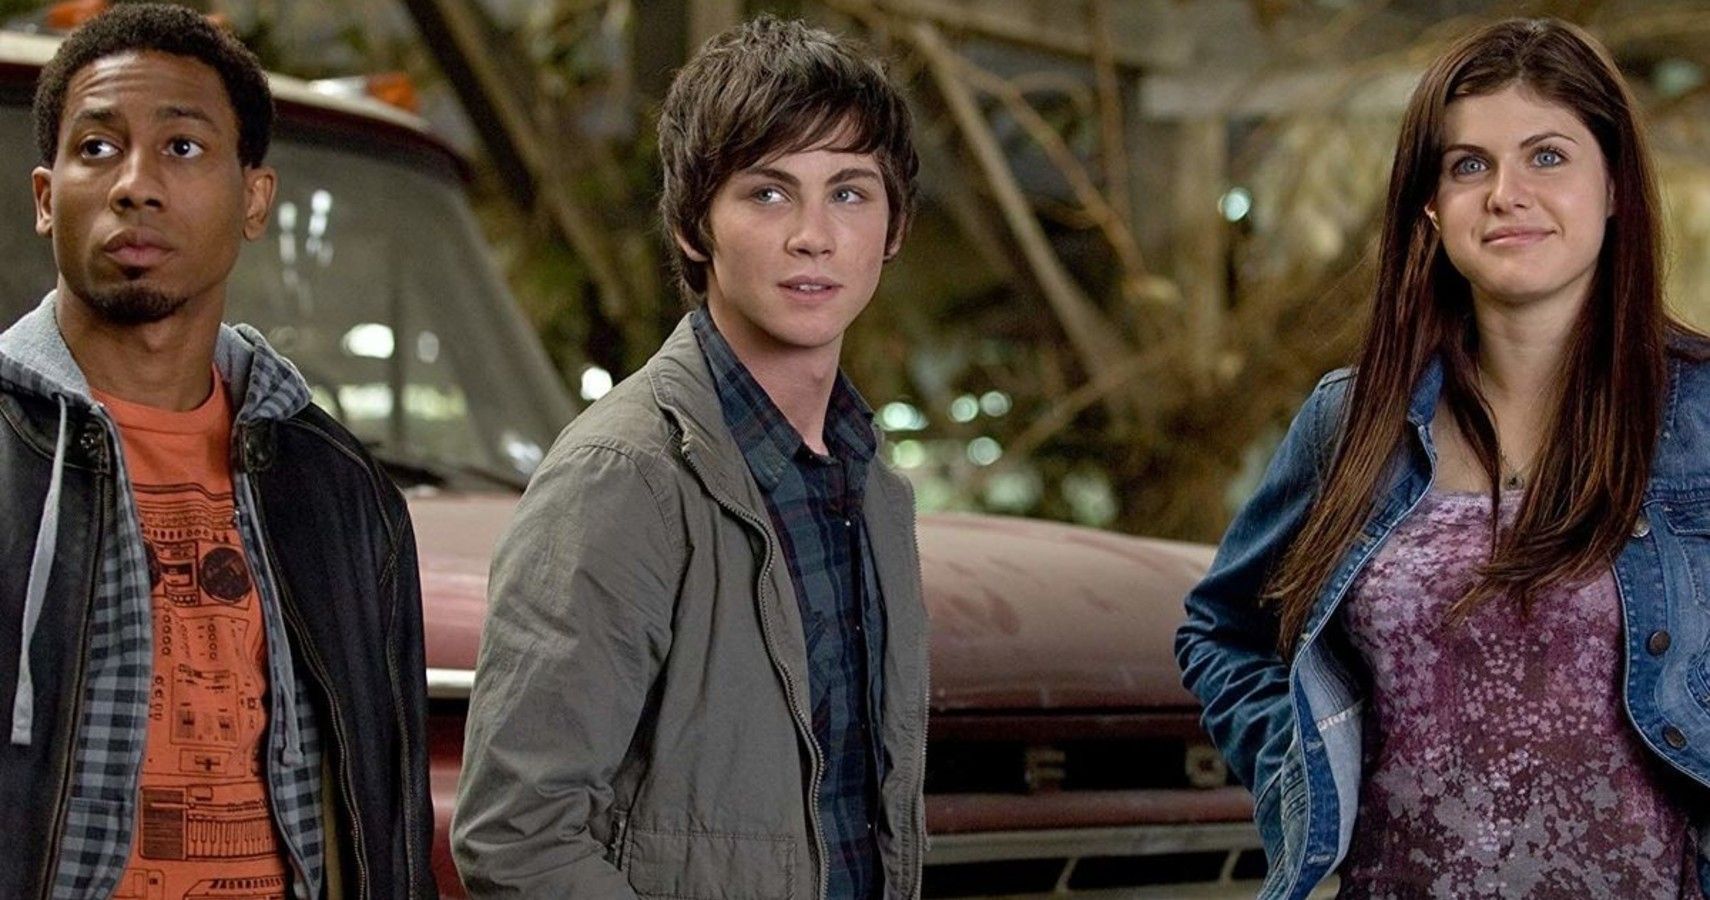 Percy Jackson 5 Ways The Series Can Improve Upon The Movies (& 5 Ways The Movies Got It Right)